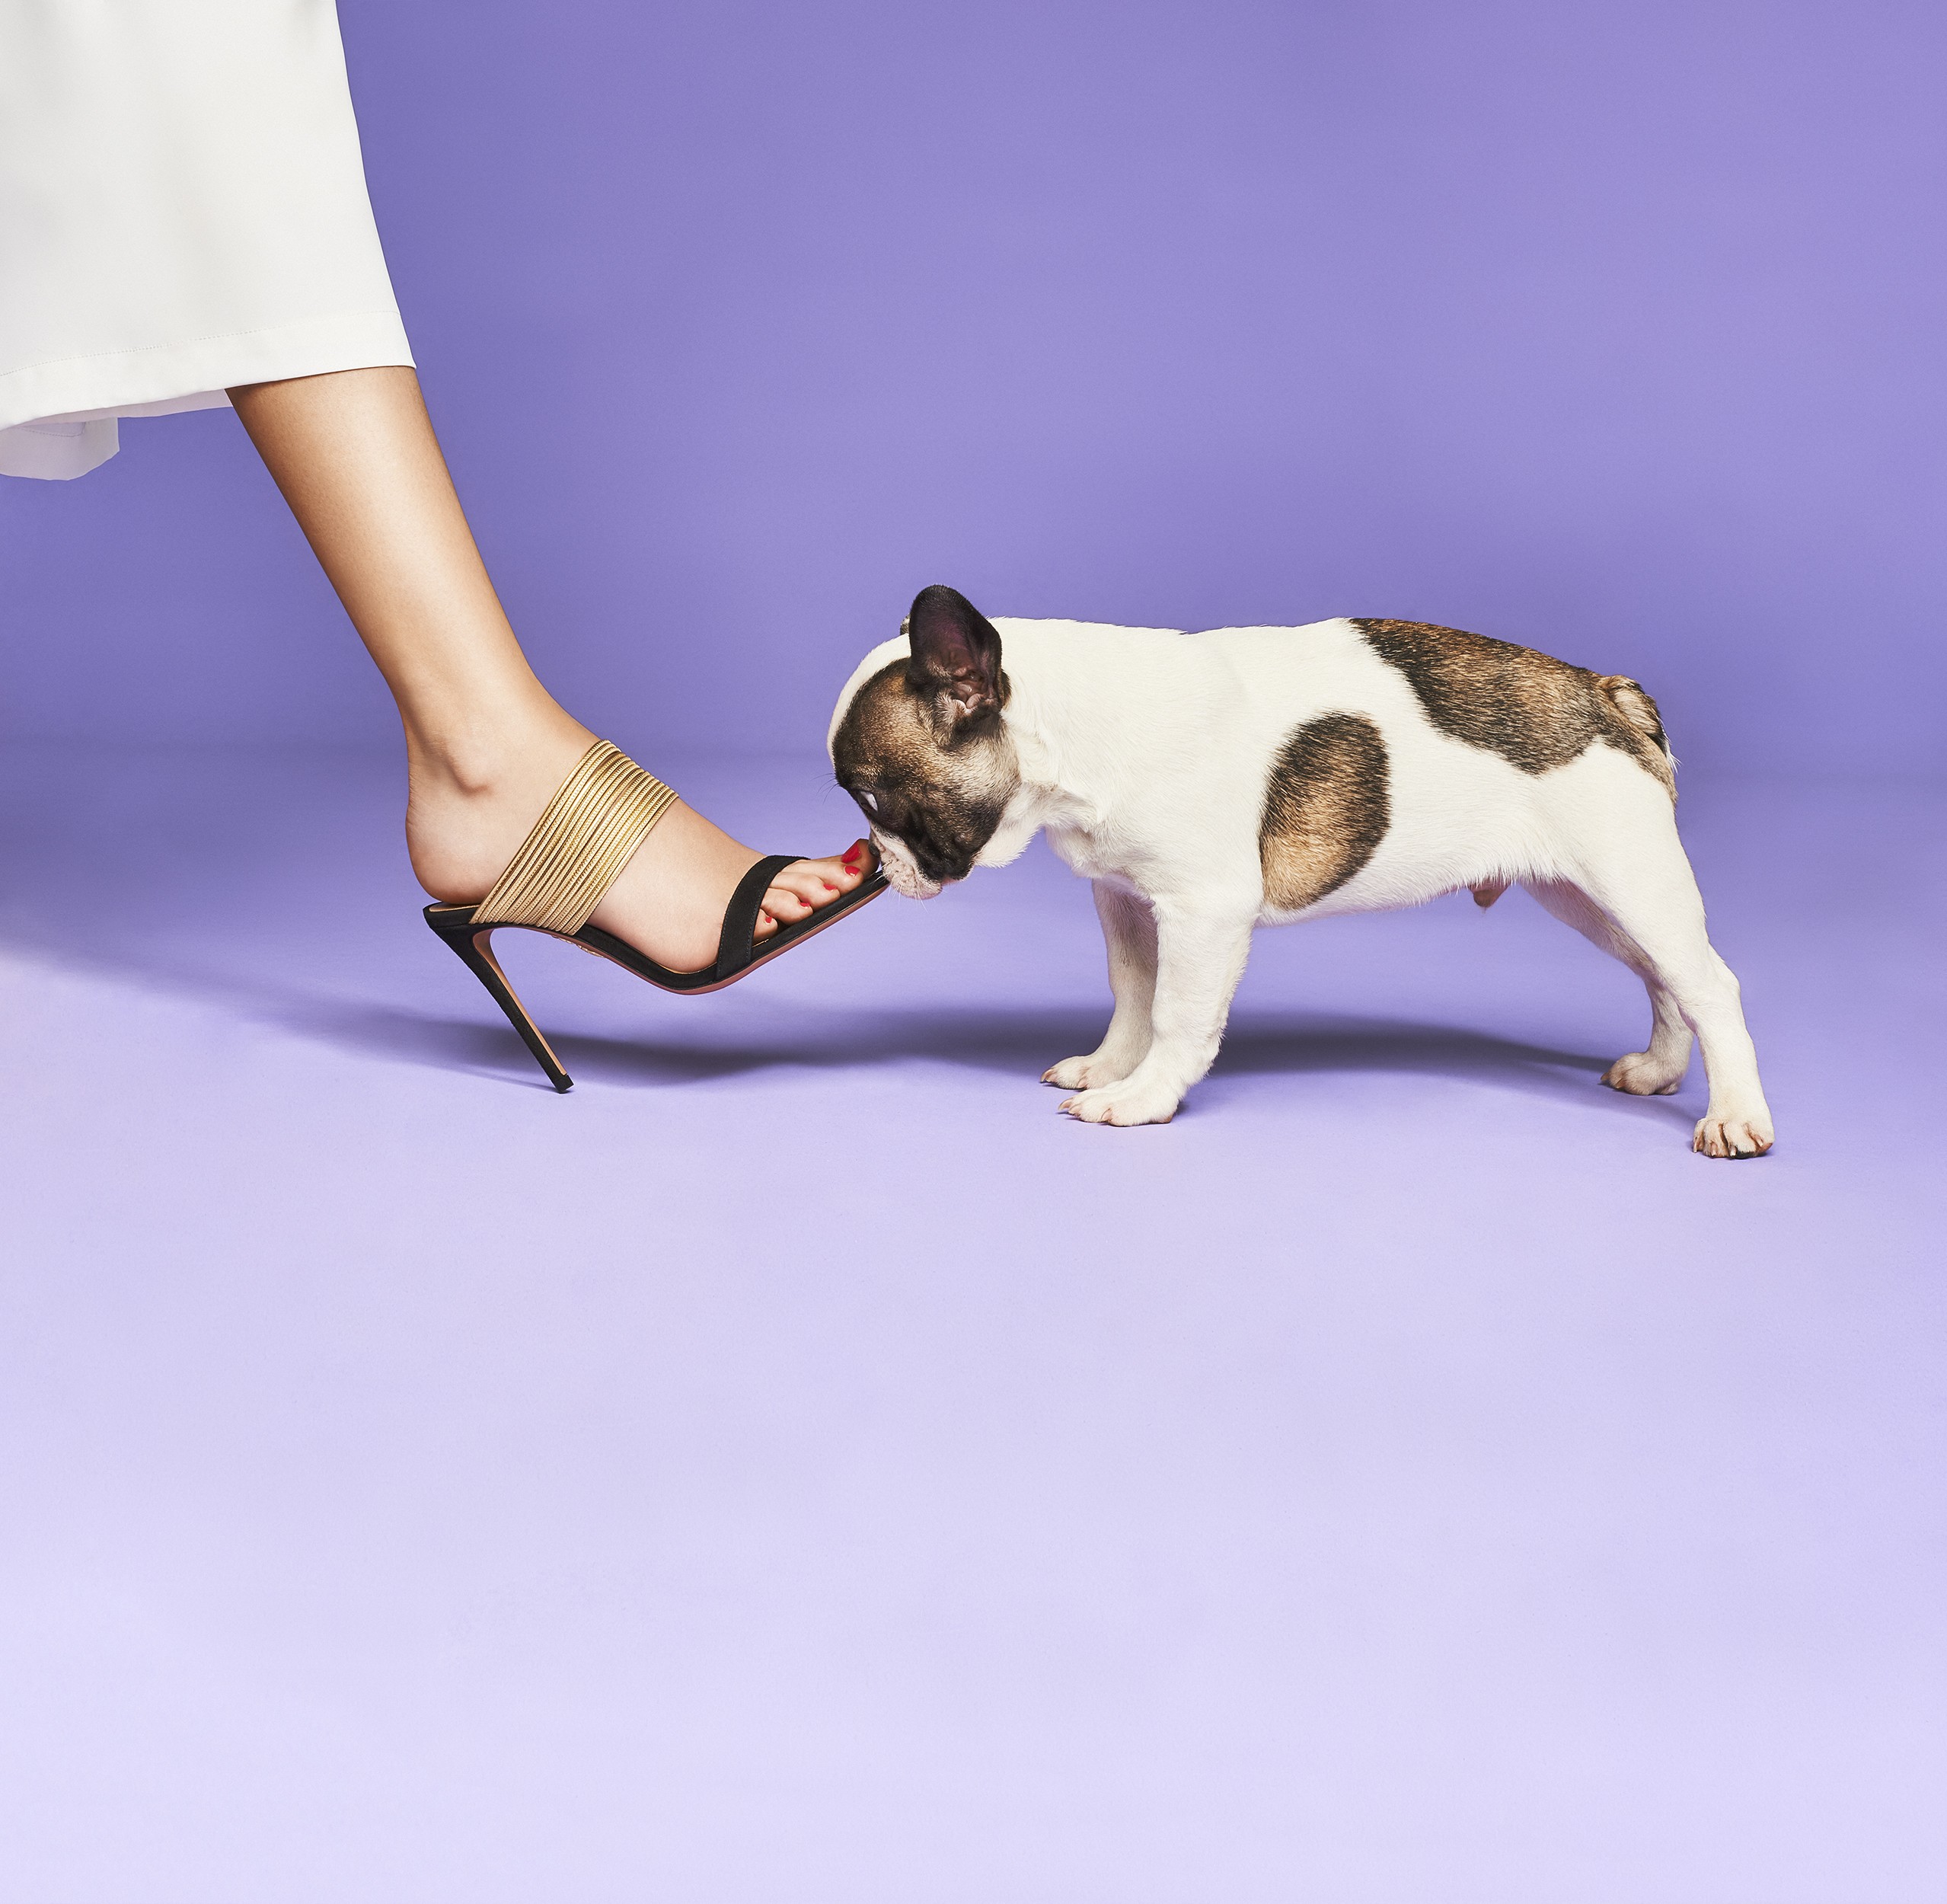 With Mother’s Day just around the corner, we have found some of the best gift ideas to spoil her. Just like these shoes from Aquazzura. (Sadly, the puppy is not included.)